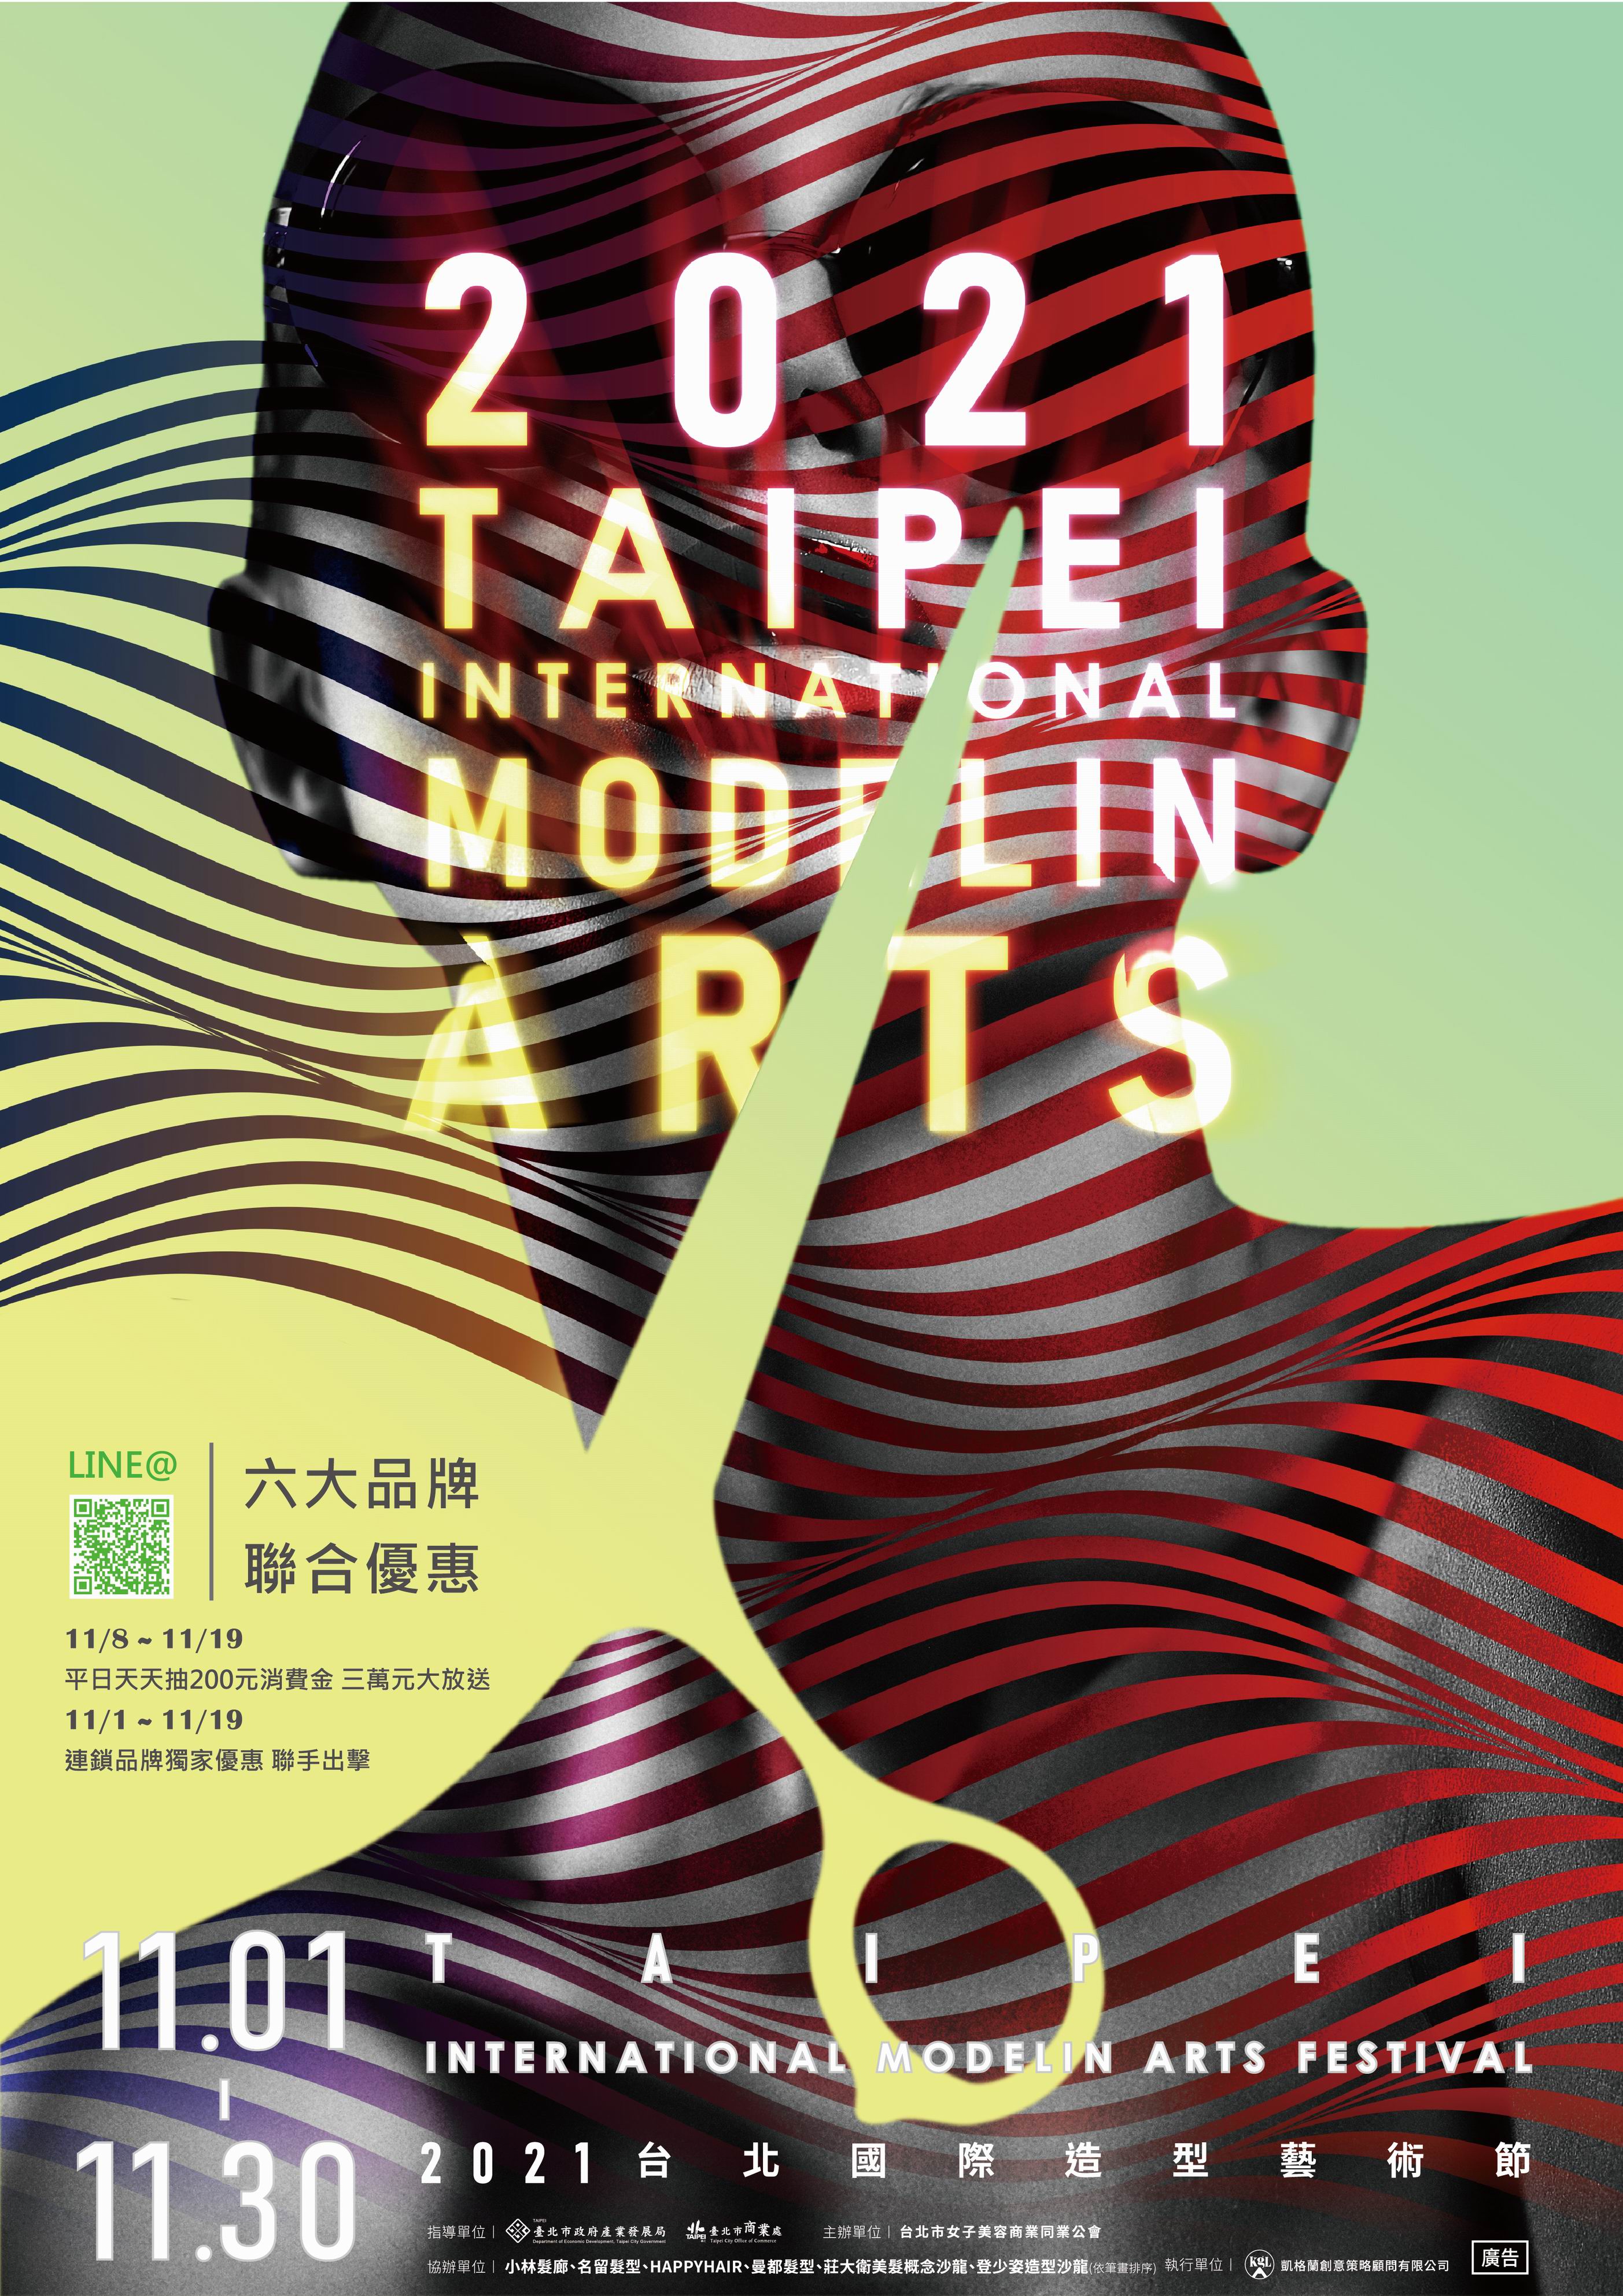 2021 Taipei International styling Festival starts plus LINE@ draws cash coupons, Haokang and demonstration hairstyle show invite you to be beautiful together.